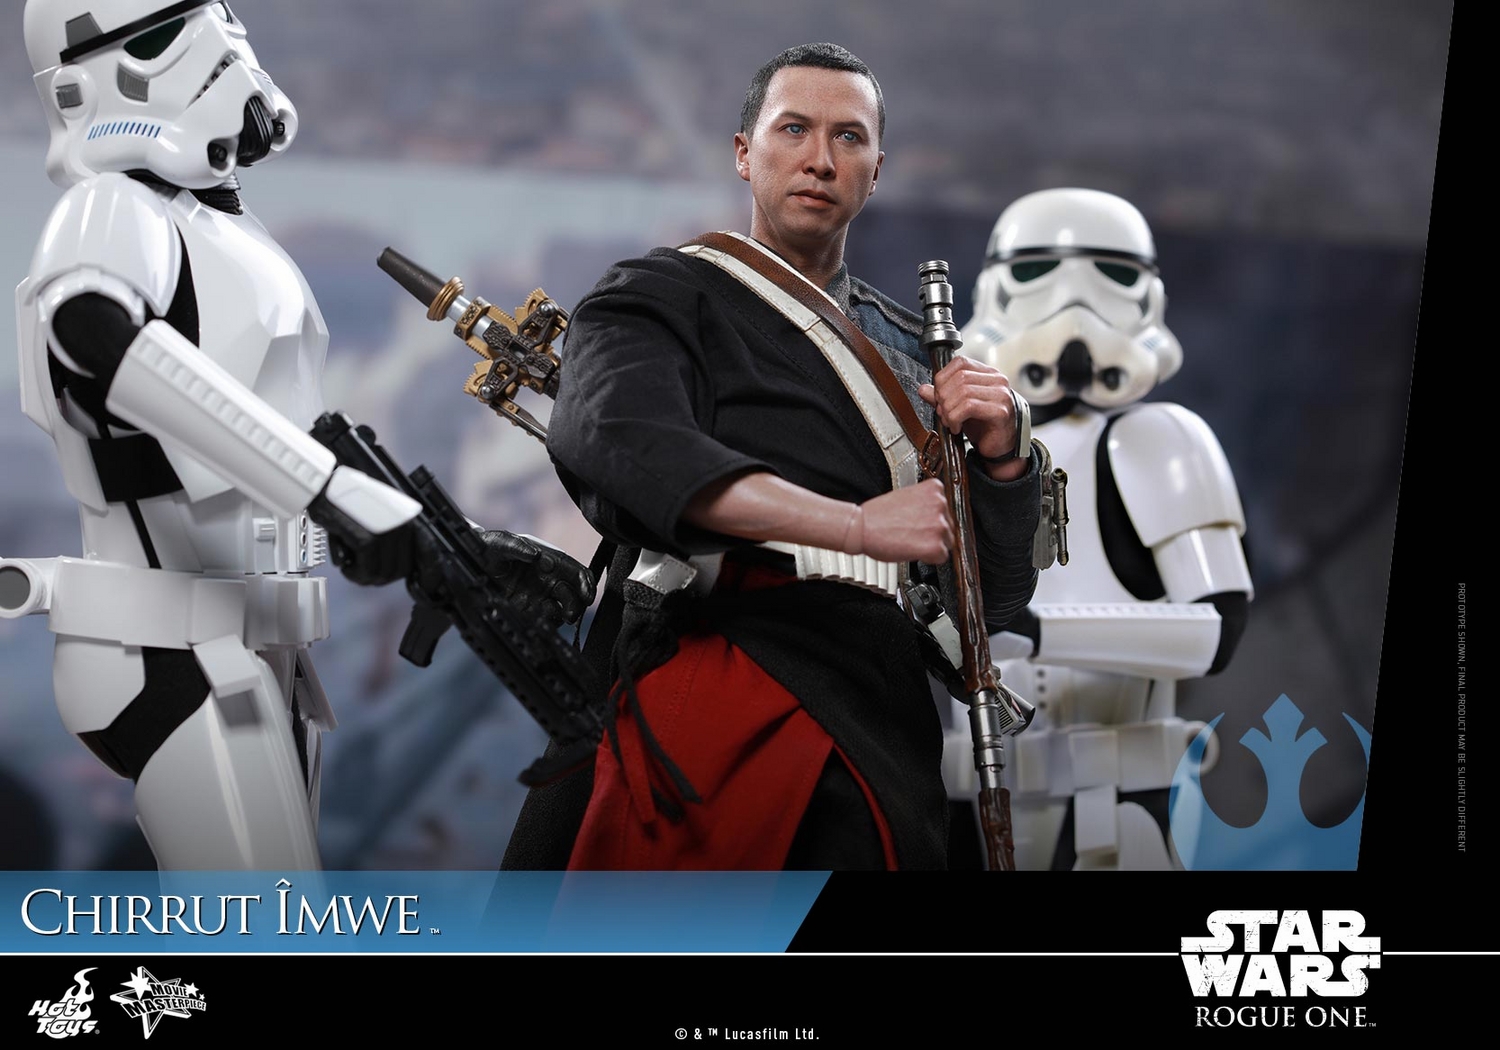 hot-toys-rogue-one-chirrut-imwe-collectible-figure-112916-007.jpg